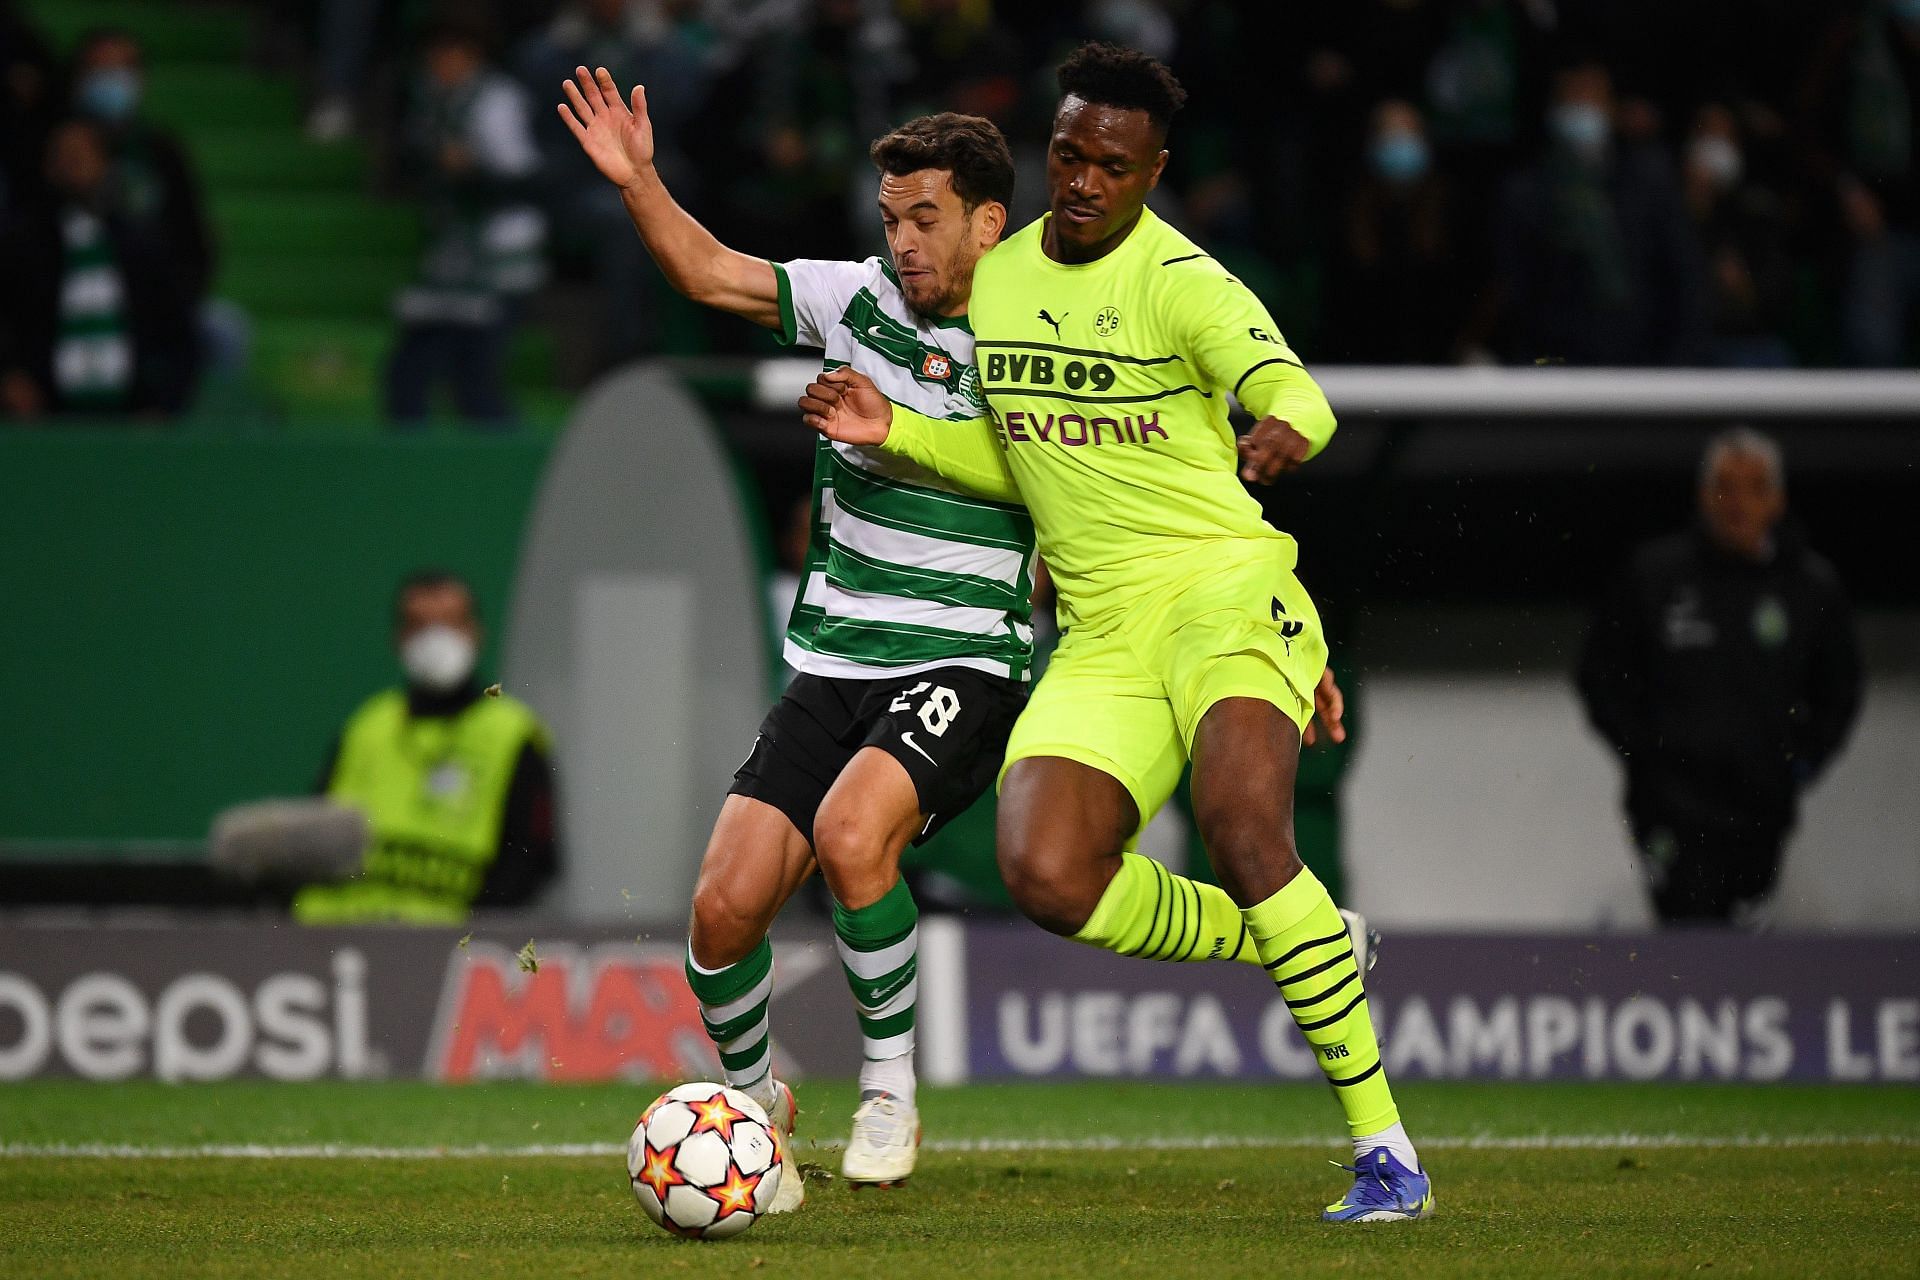 Pedro Goncalves (left) has been a great signing for Sporting.